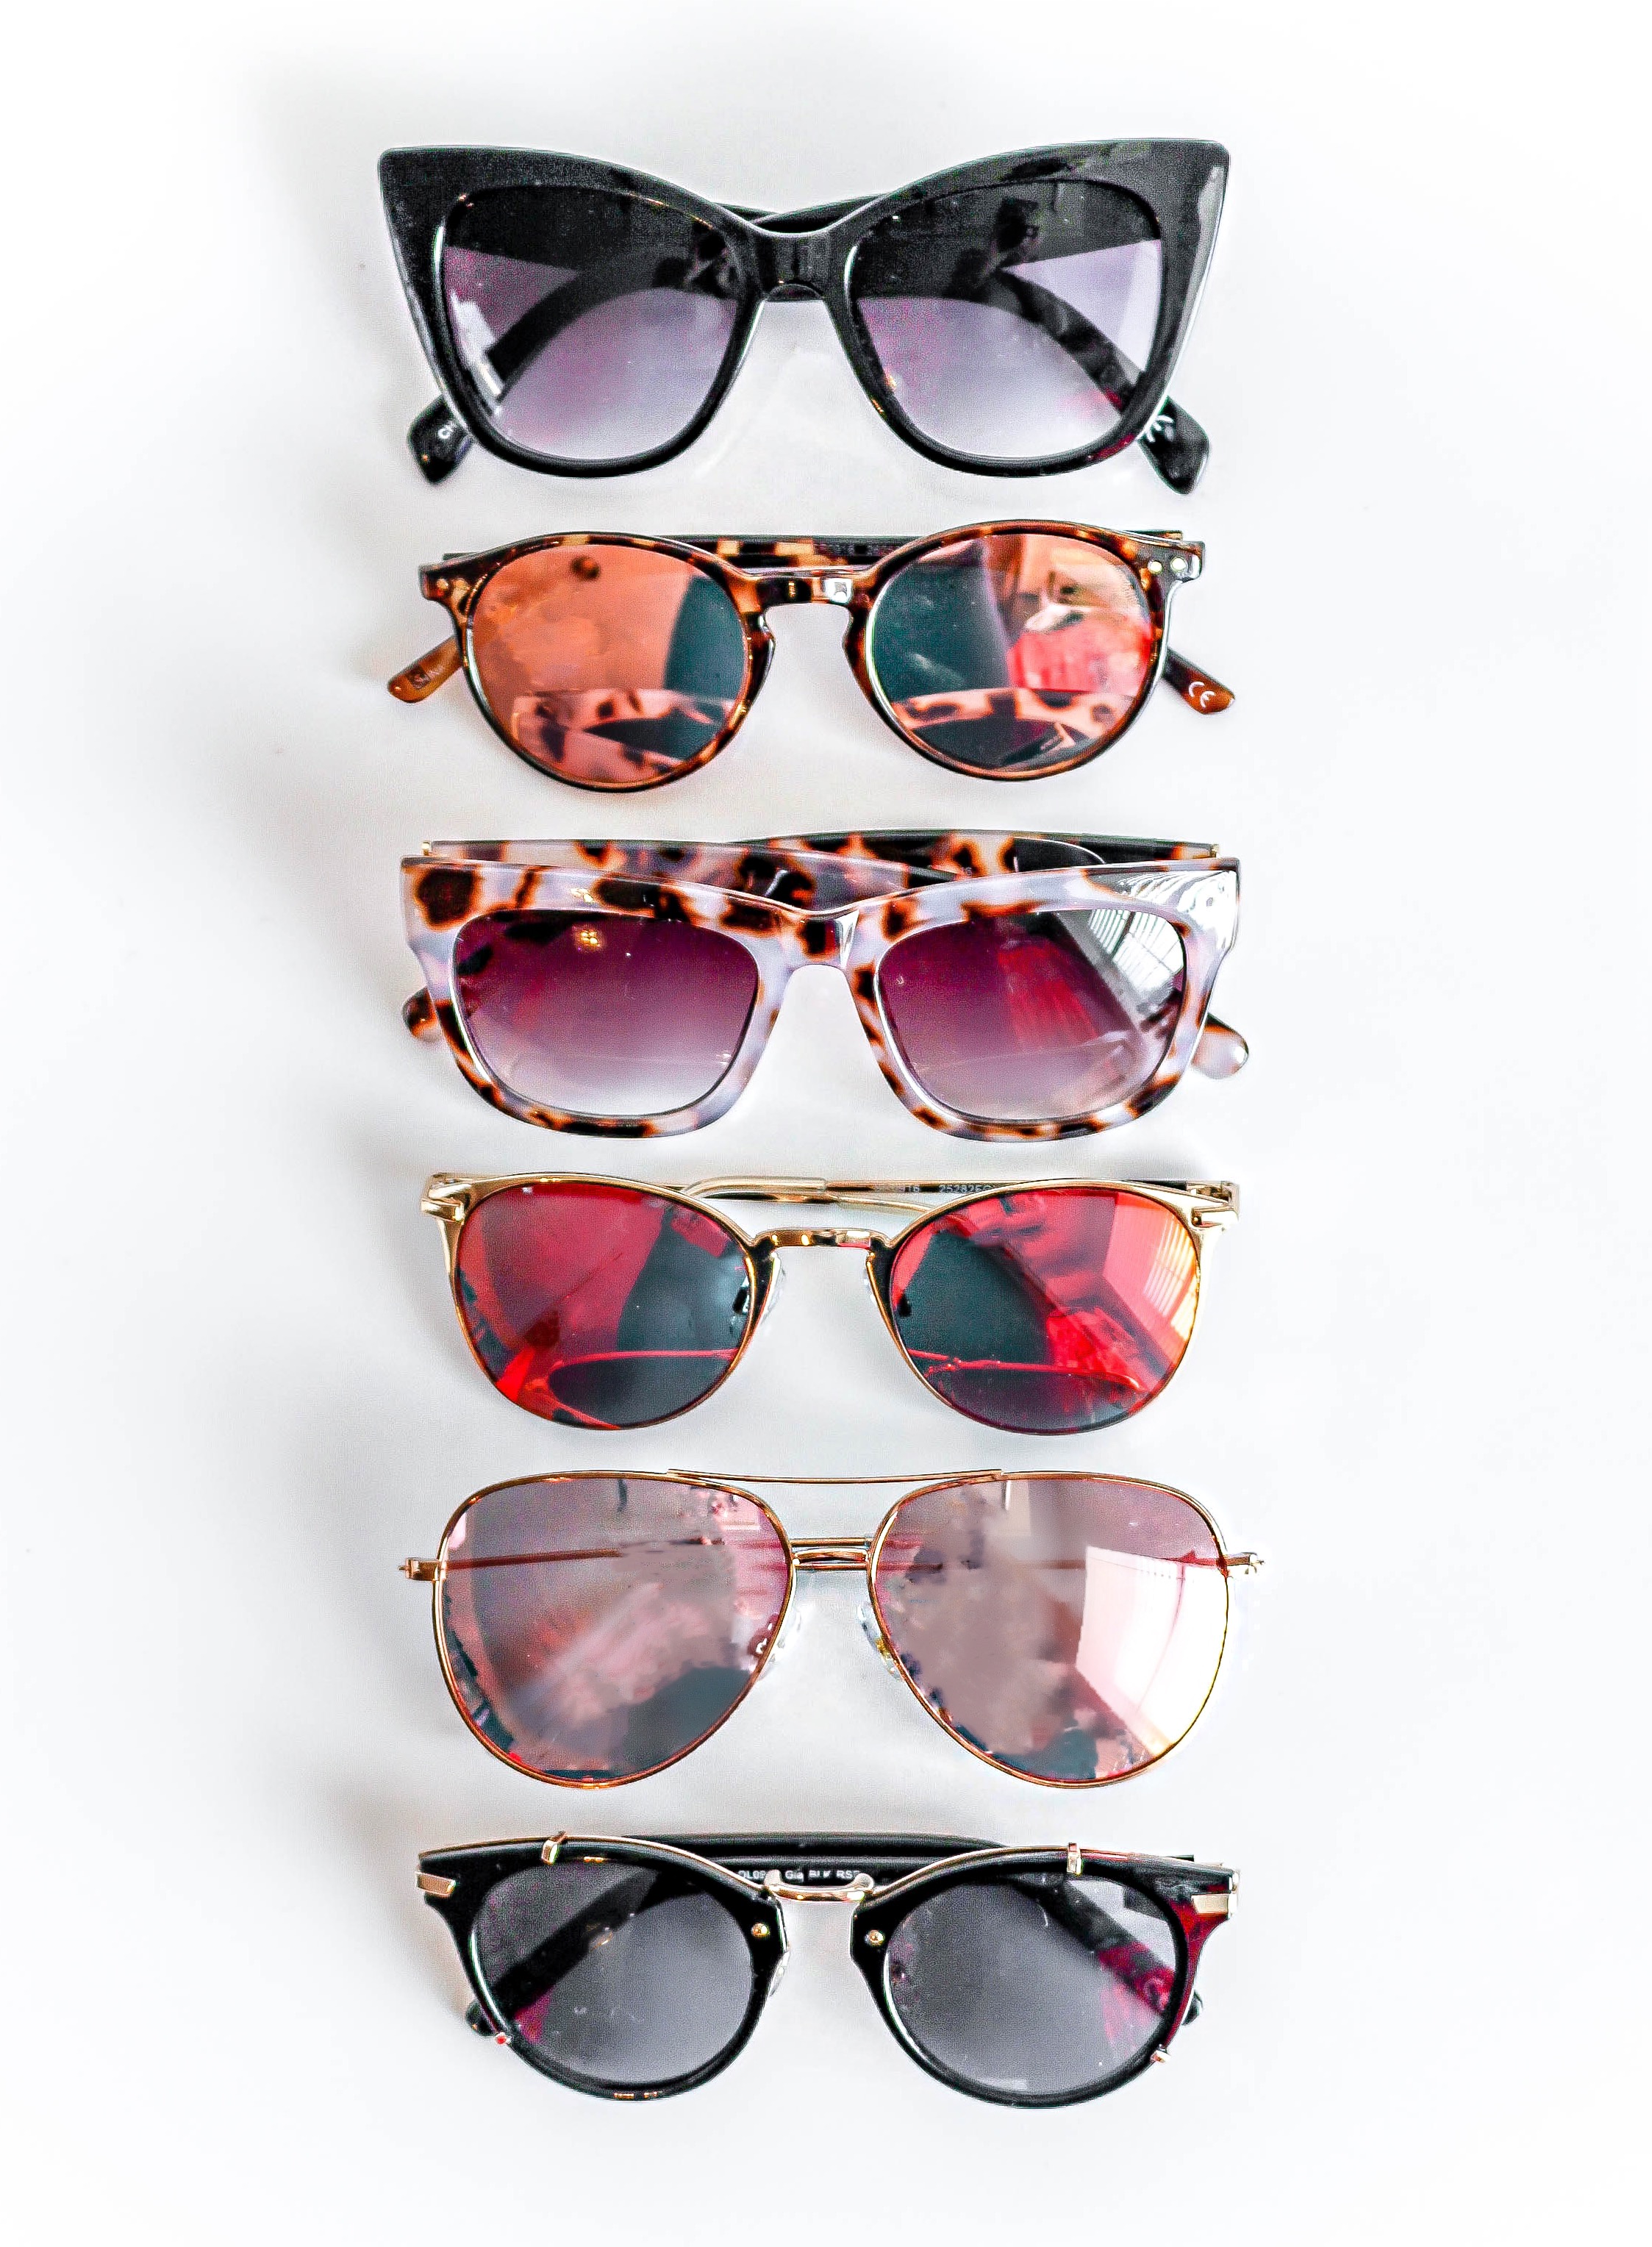 Affordable, Trendy Shades for Summer with Foster Grant | love 'n' labels http://bit.ly/2oDXFM5